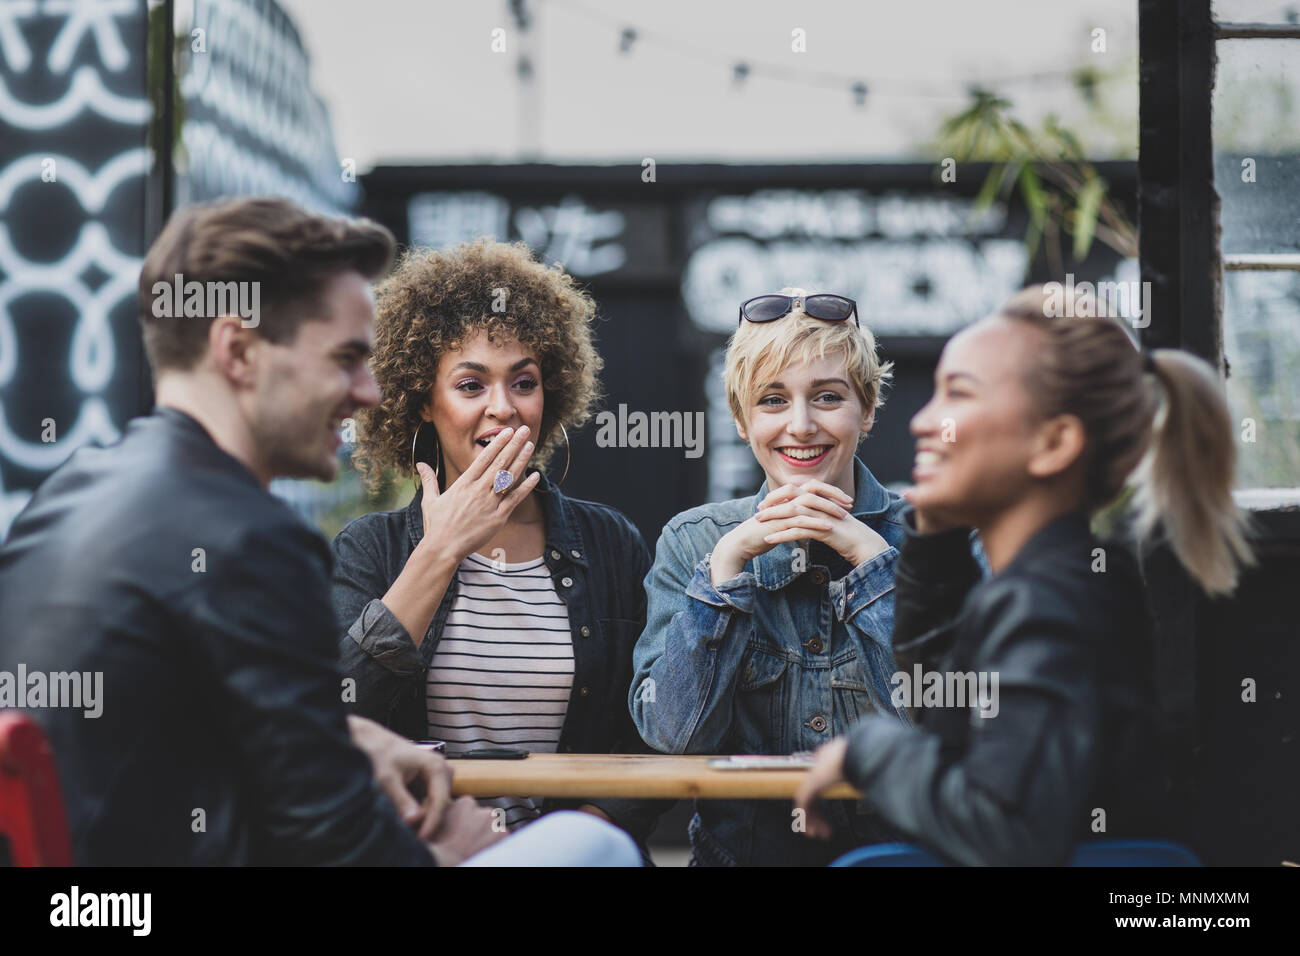 Friends socialising outdoors in summer Stock Photo